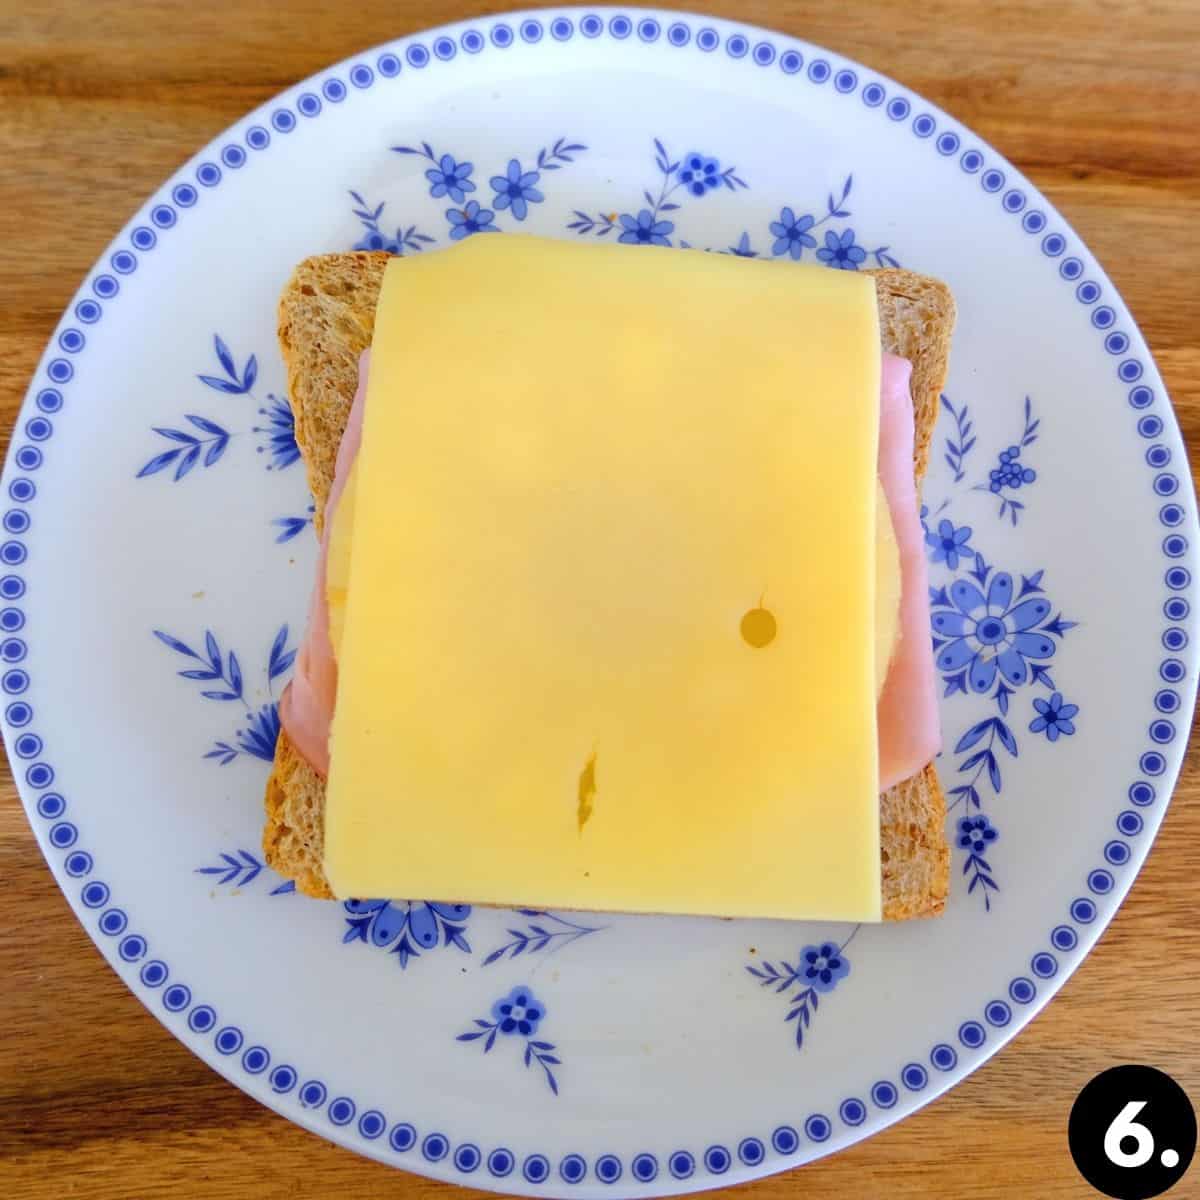 Piece of toast with ham, cheese and pinapple.